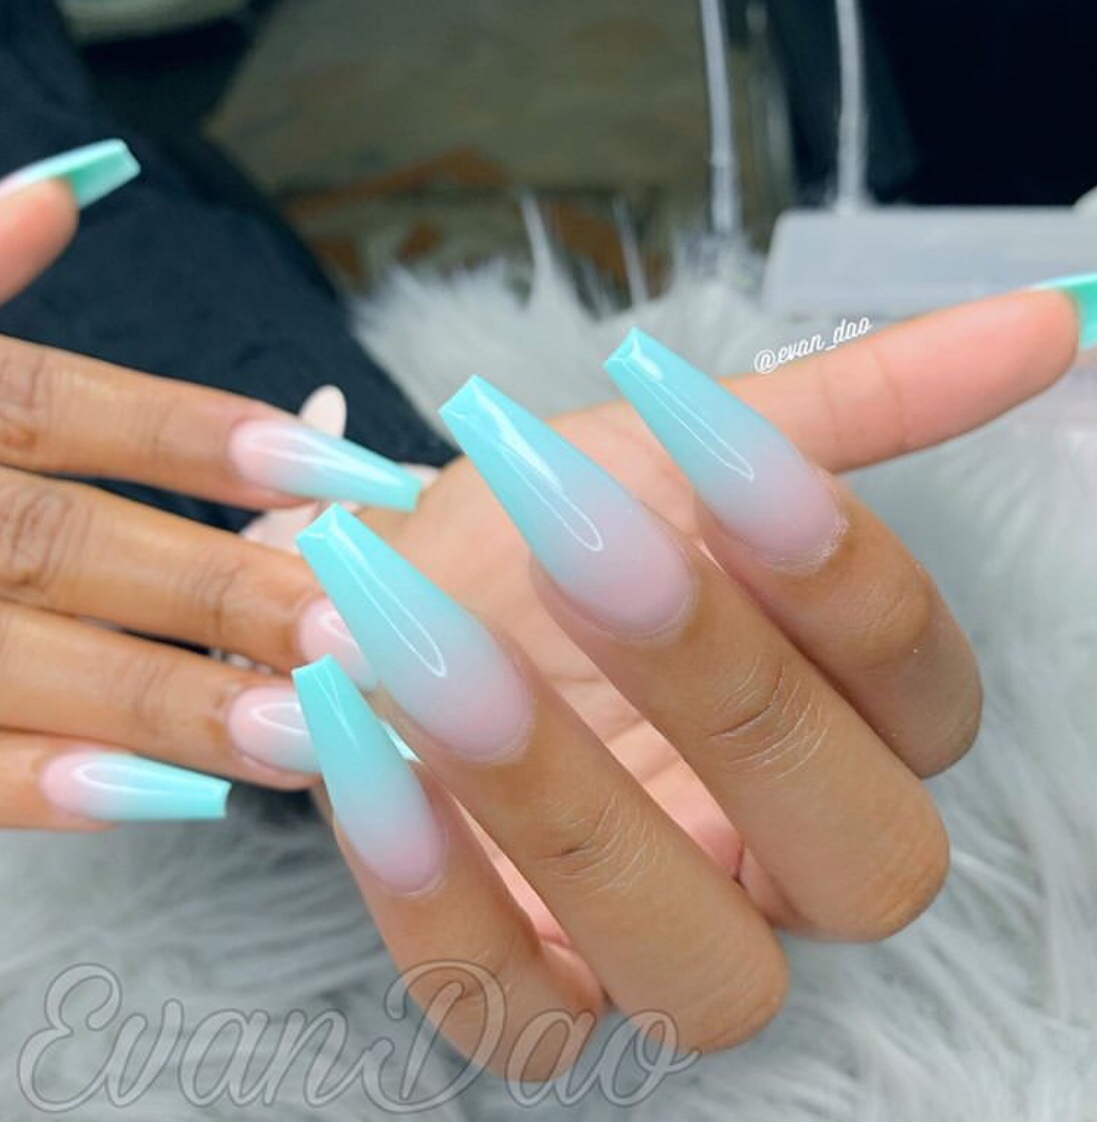 50+ Glam Nail Designs For Prom 2020 - The Glossychic